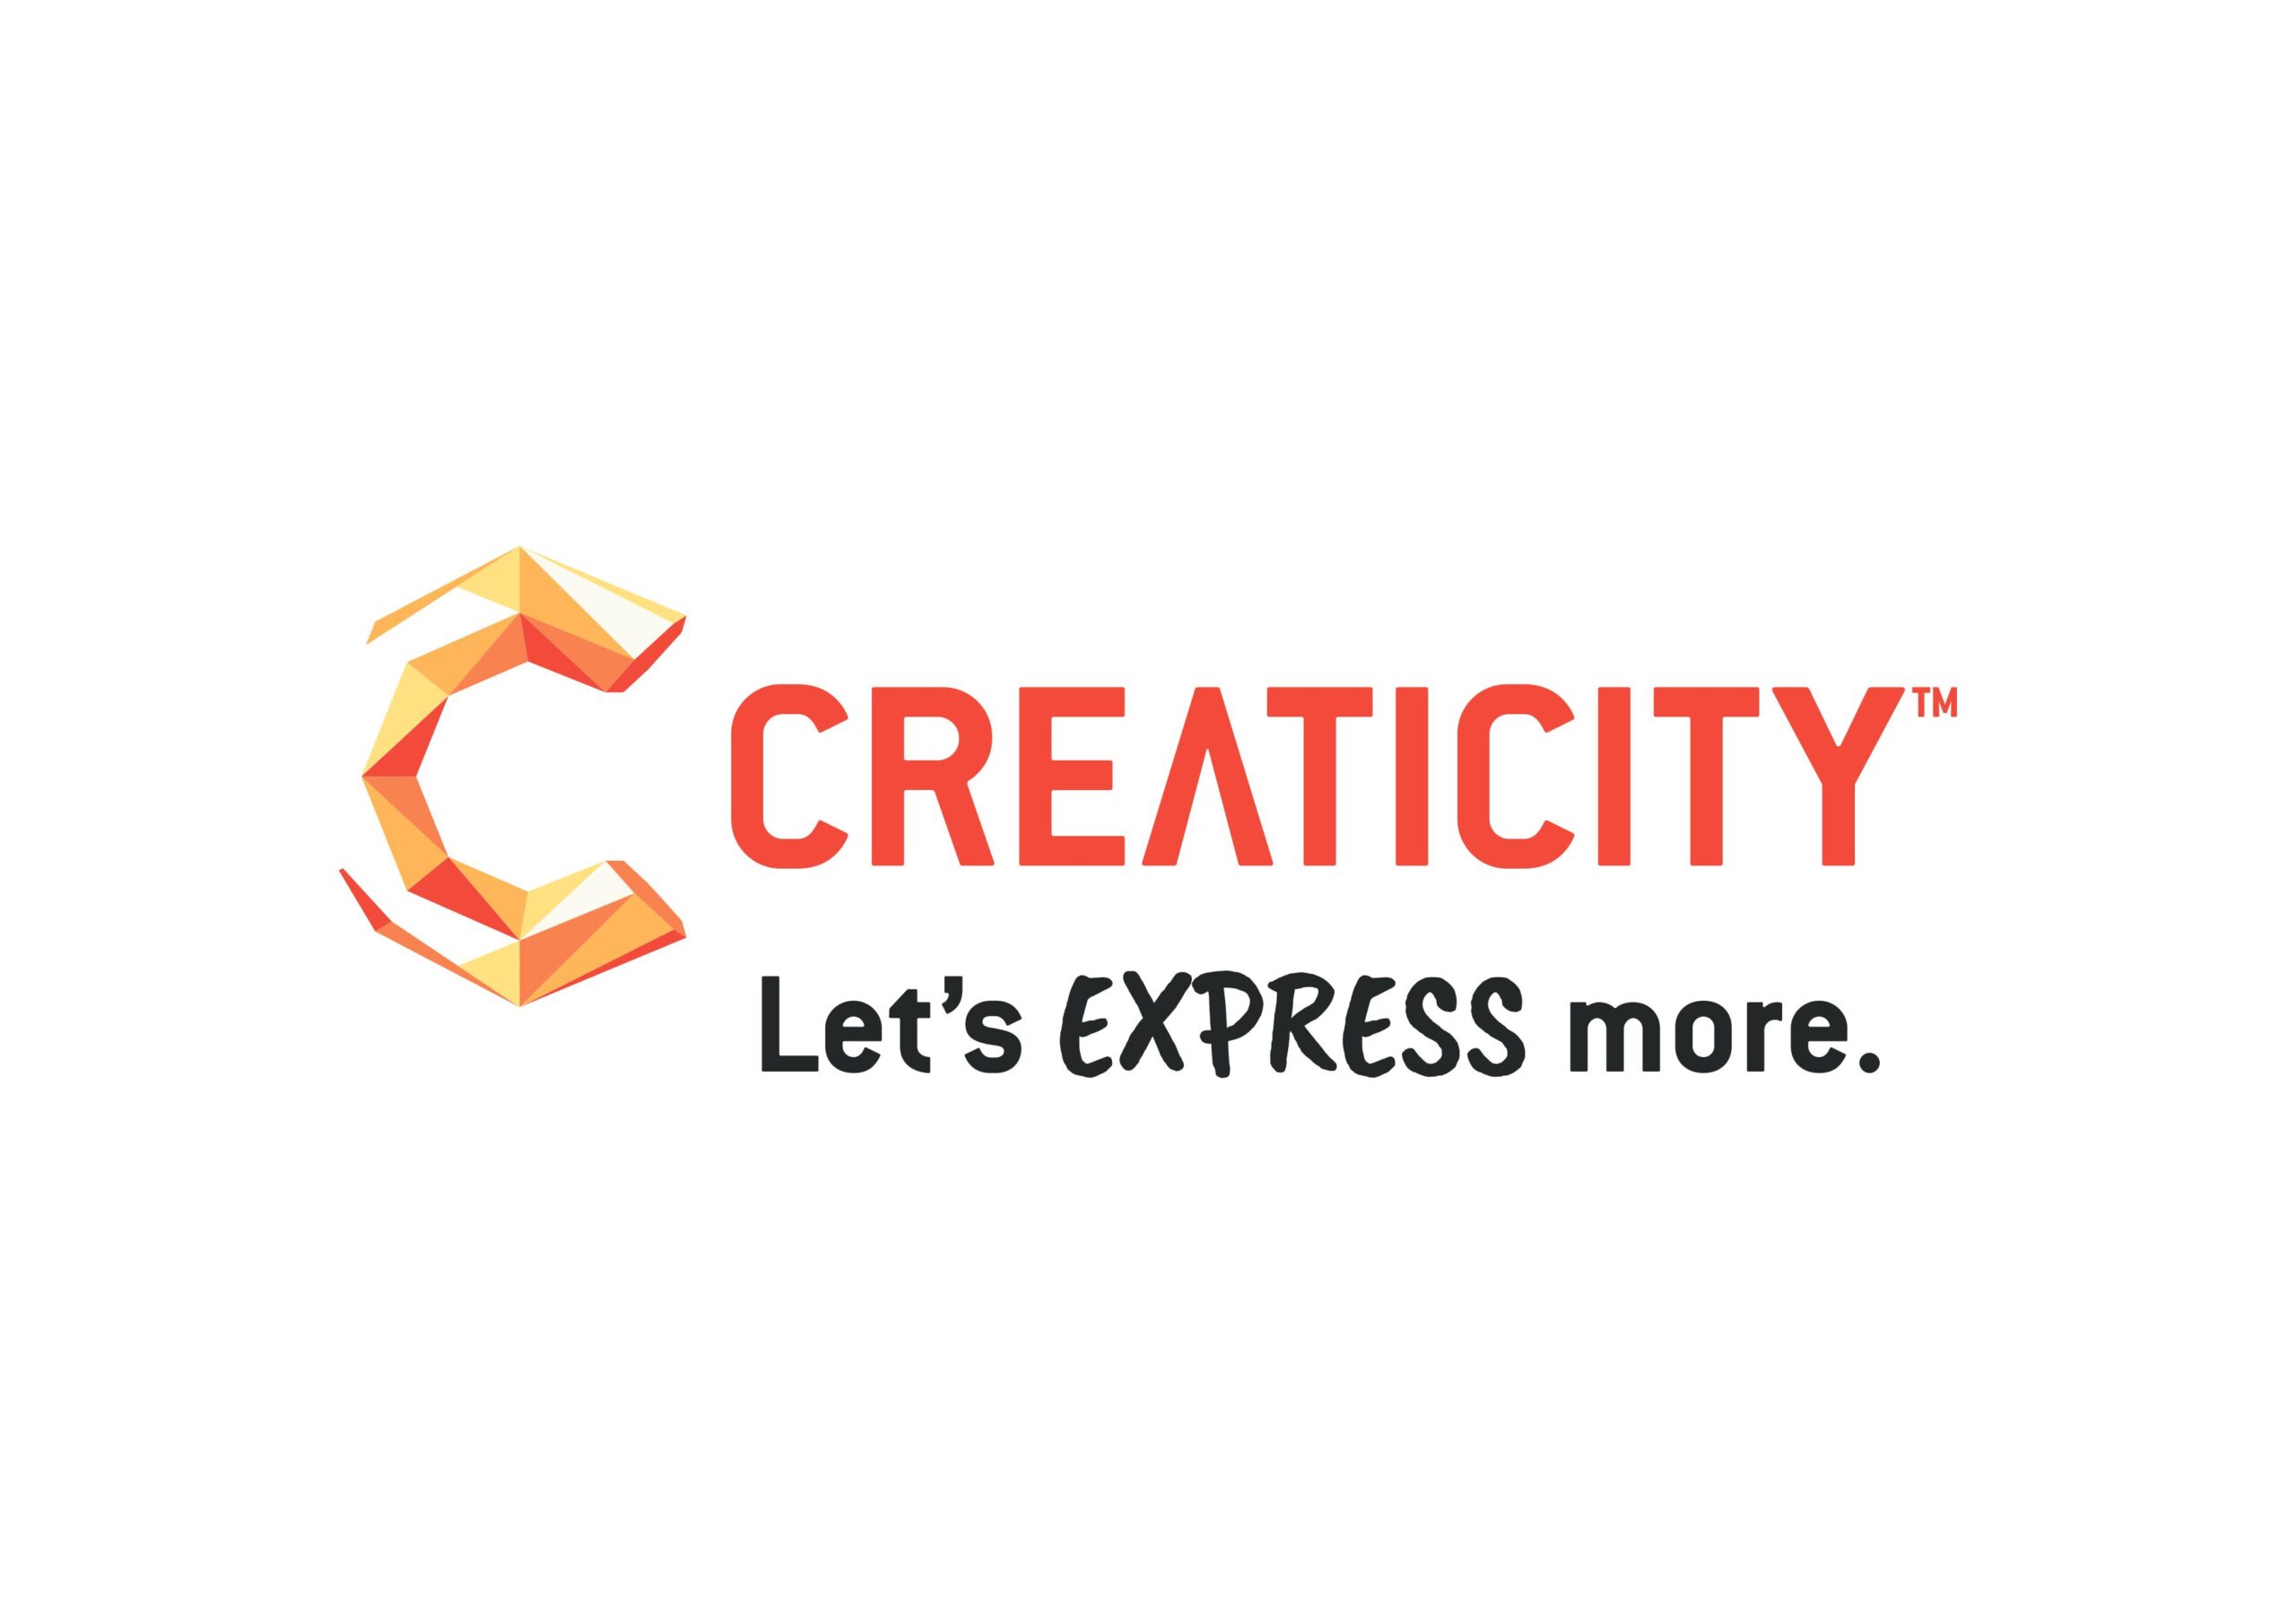 Creaticity launches the second edition of its Future of Homes e-book, a rich compilation of knowledge and insights into the home furniture and décor ecosystem